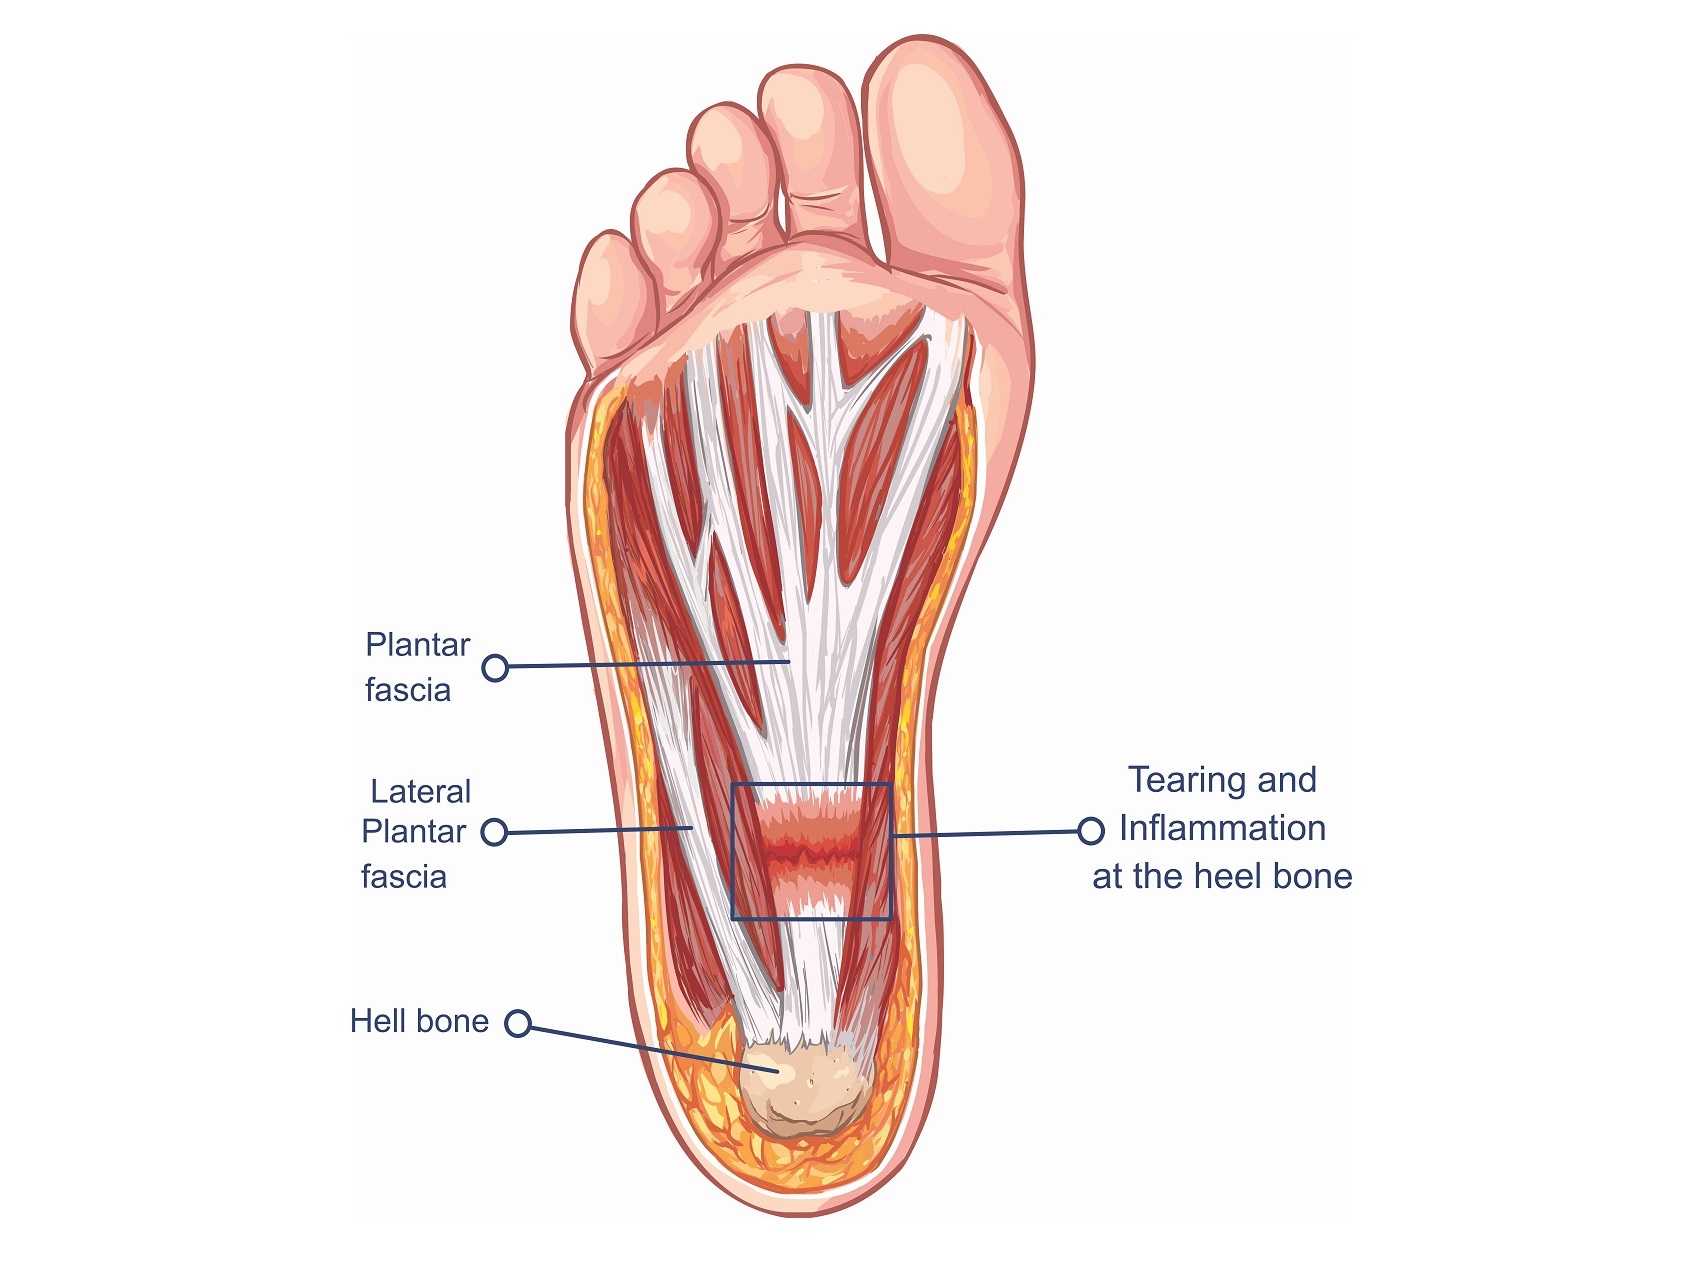 PLANTAR FASCIA STRETCH - Exercises, workouts and routines